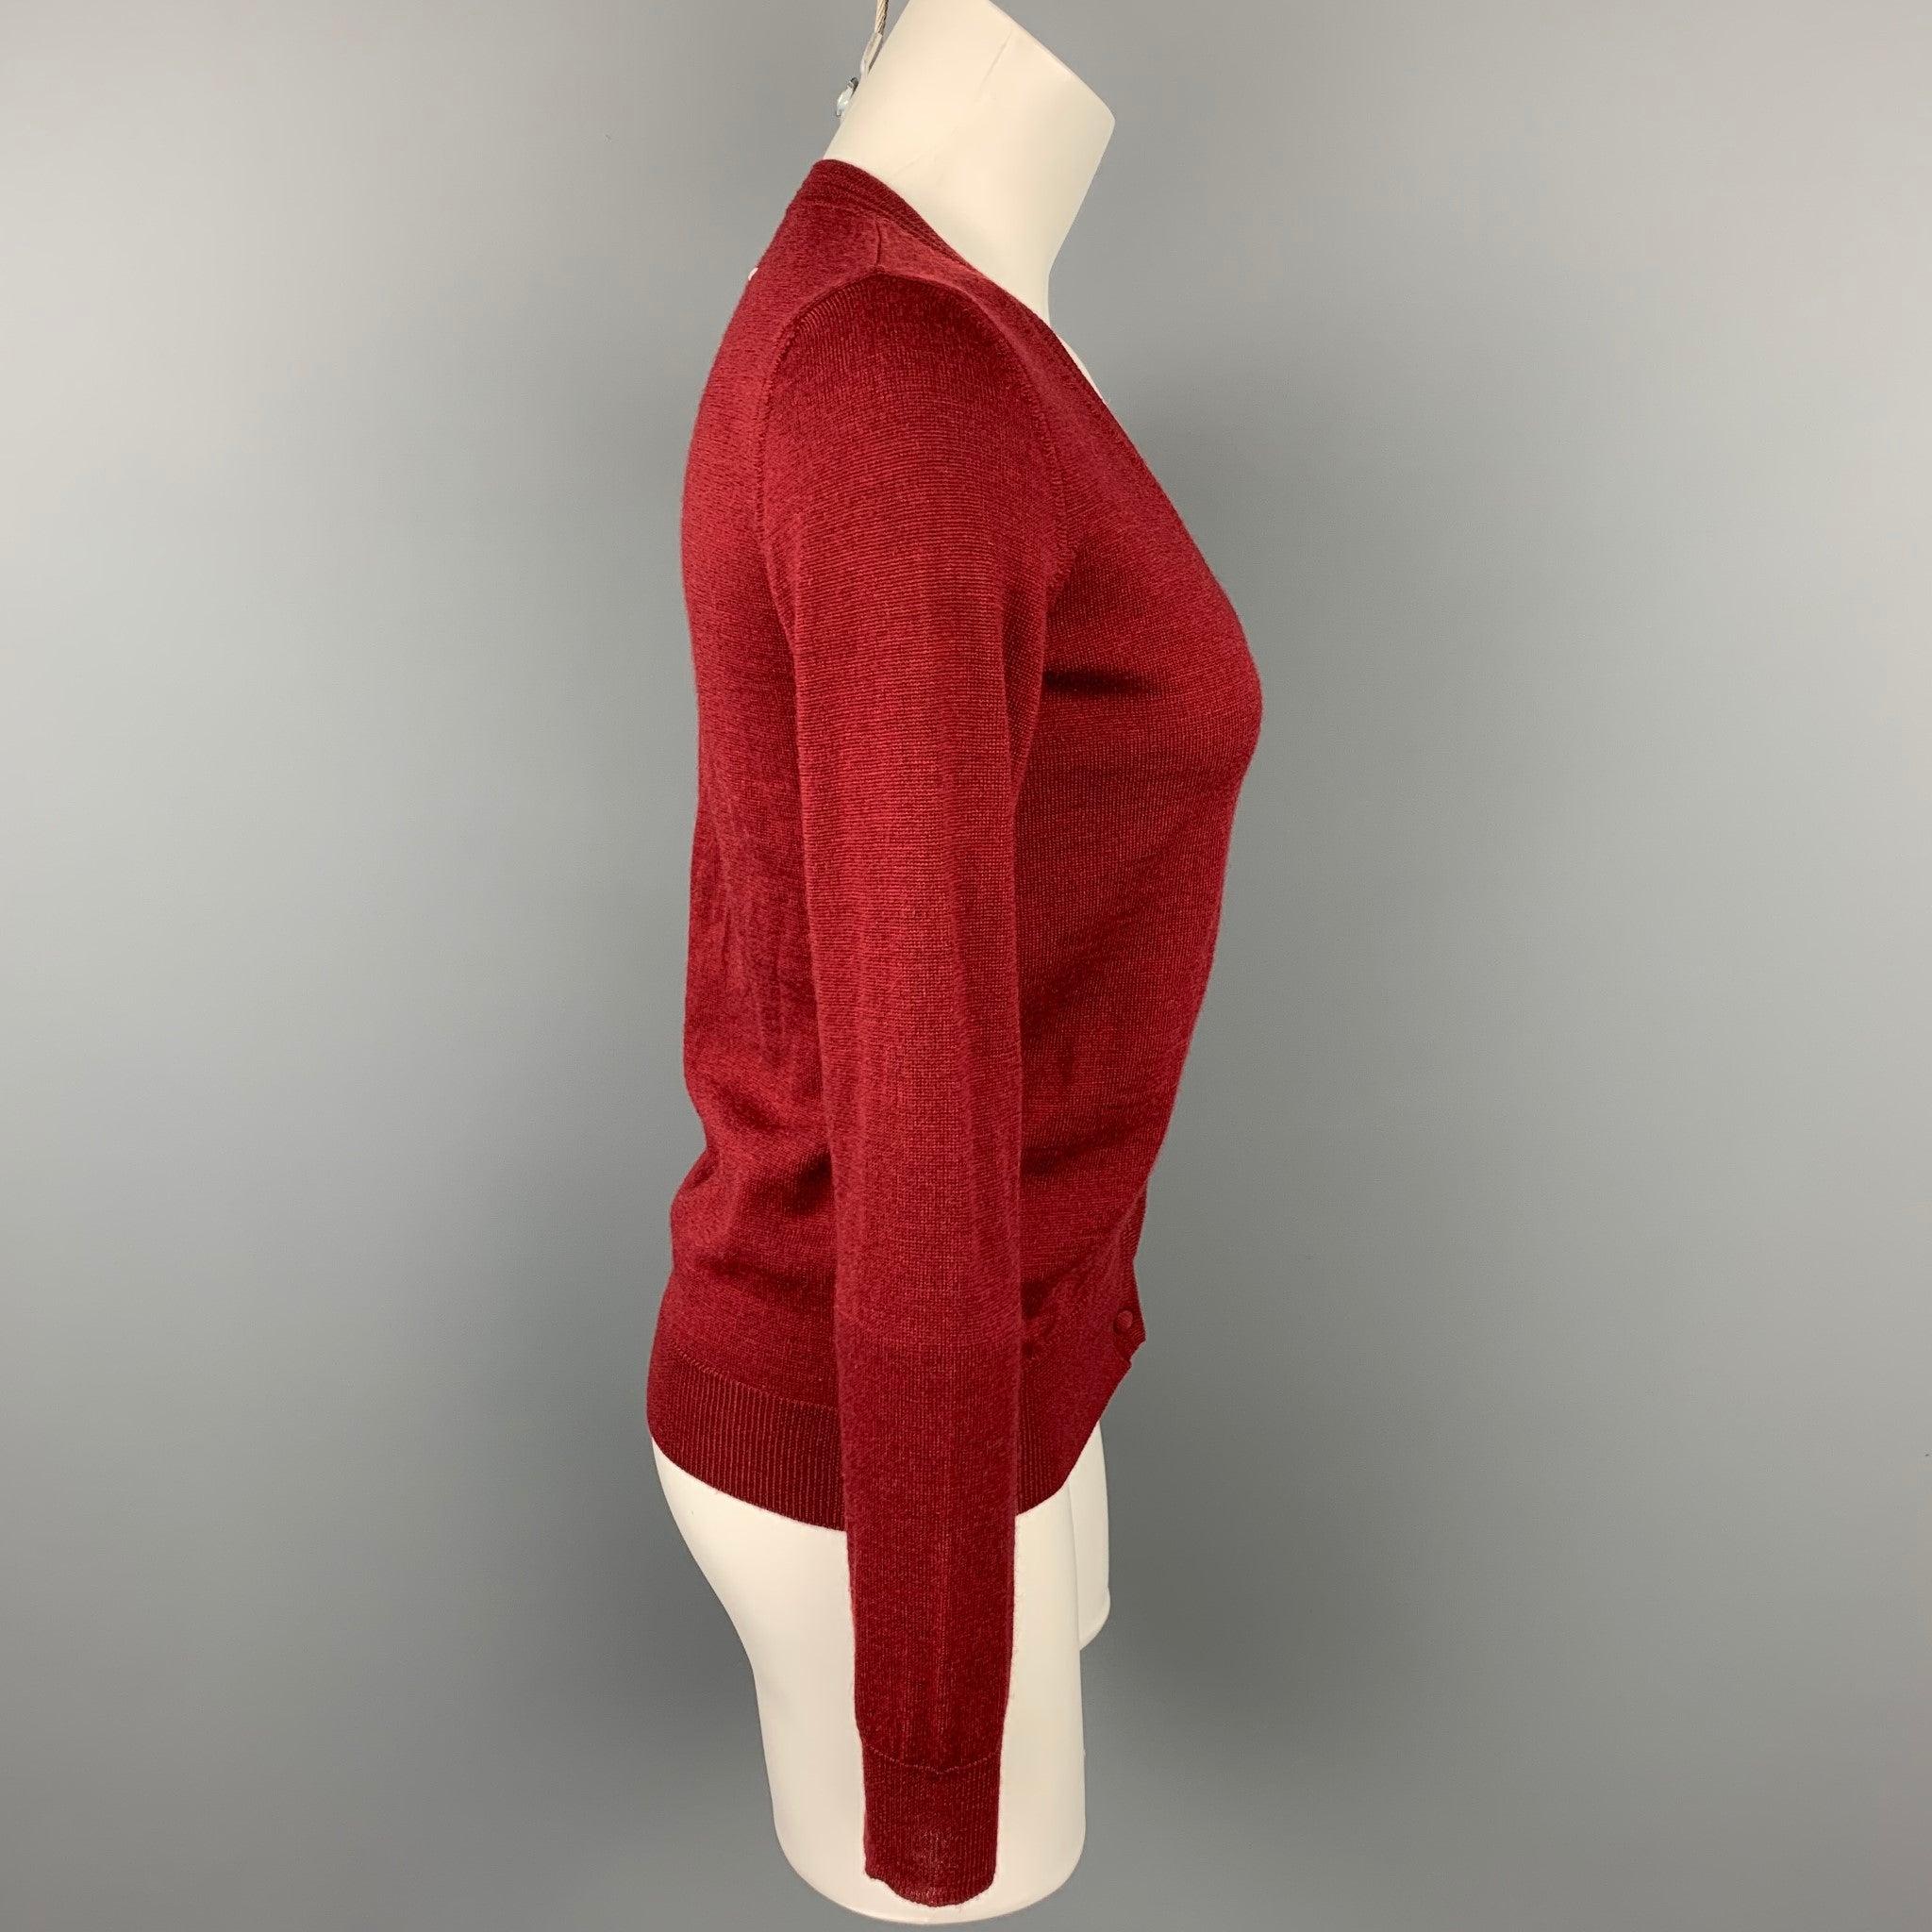 MAISON MARTIN MARGIELA cardigan comes in a burgundy wool featuring a covered button closure. Made in Italy.Very Good
Pre-Owned Condition. 

Marked:   S 

Measurements: 
 
Shoulder: 15 inches  Bust: 34 inches  Sleeve: 26 inches  Length: 23.5 inches 
